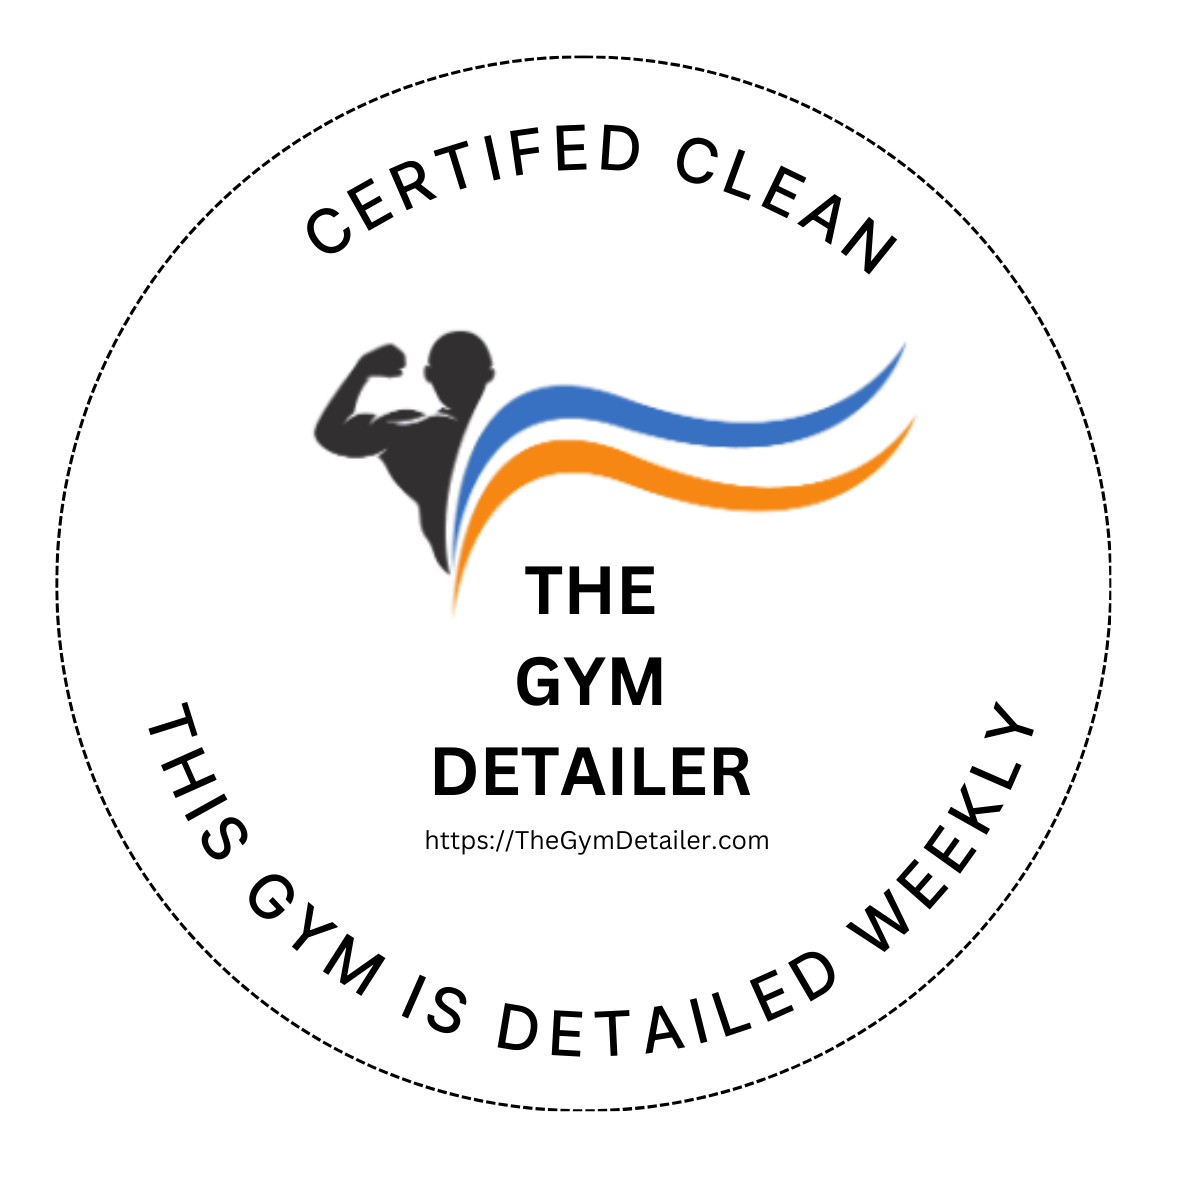 The Gym Detailer - Certified Clean